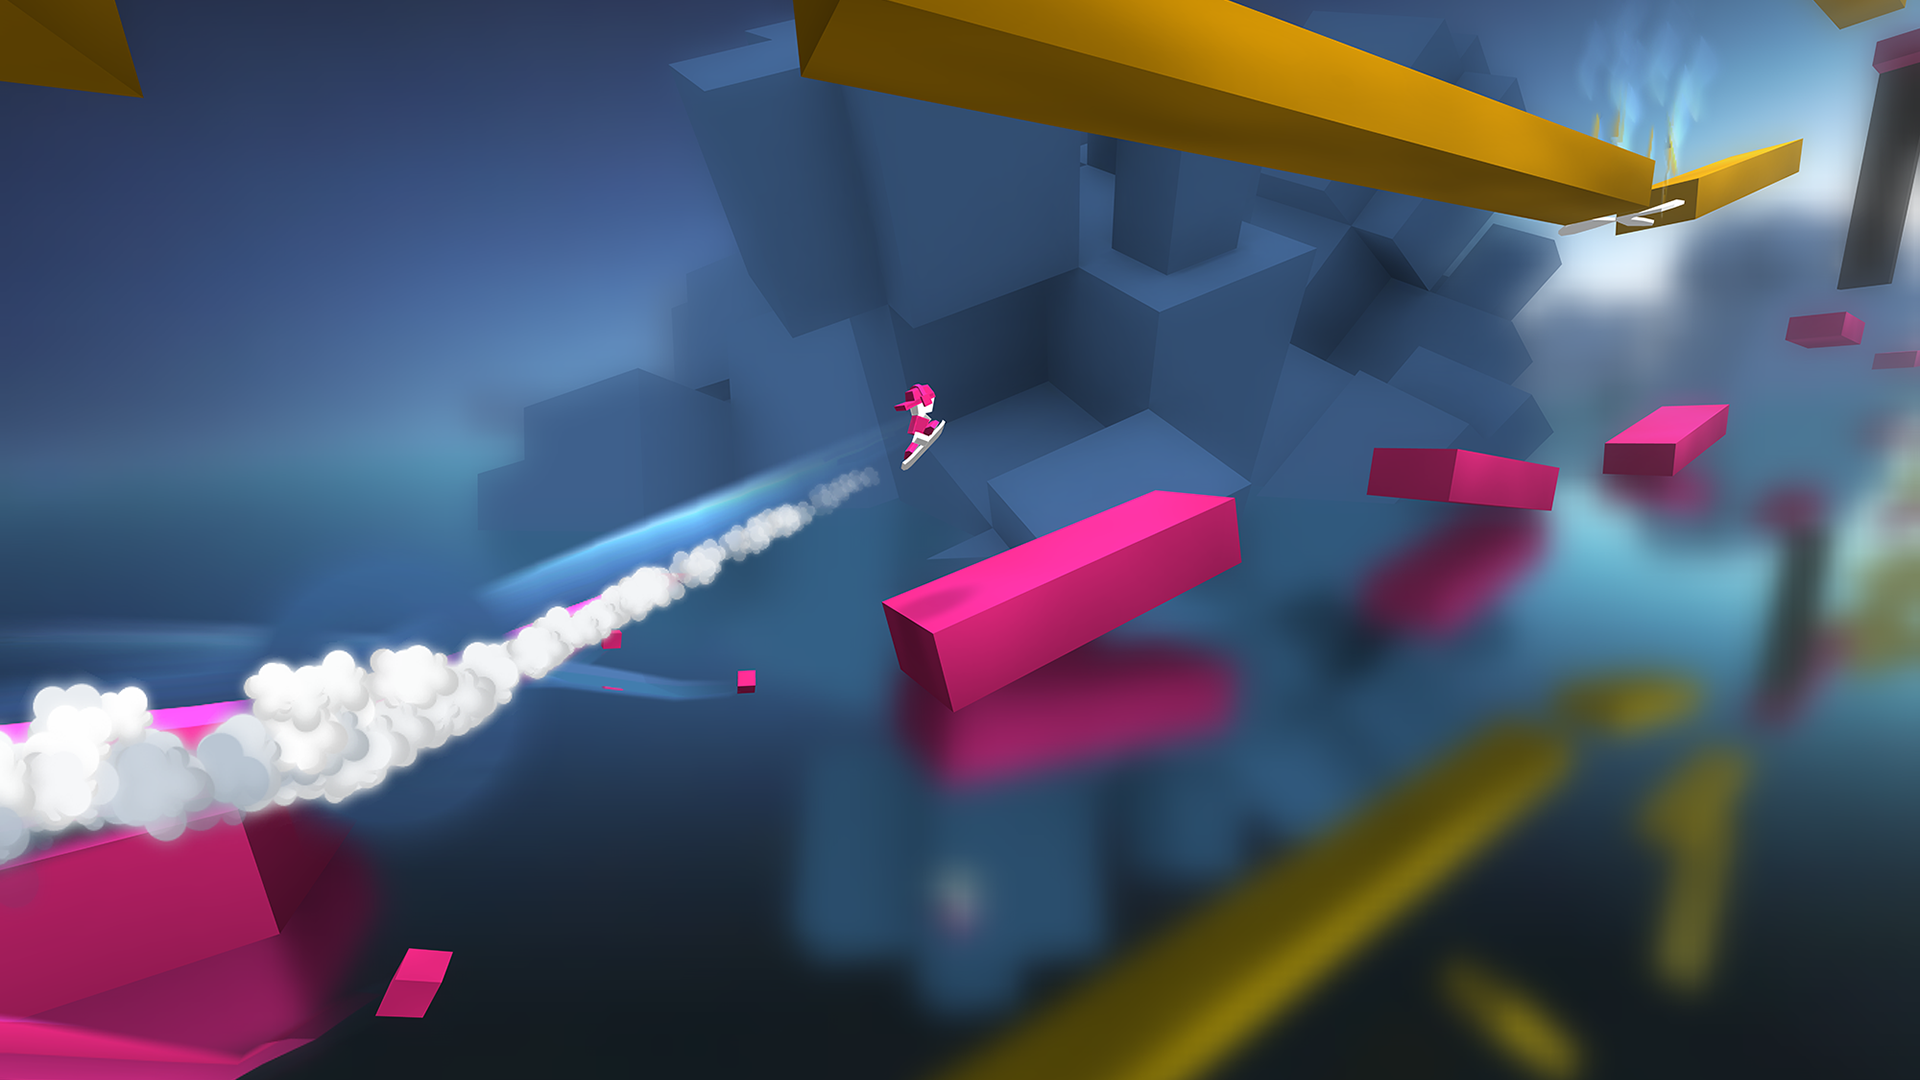 The pixel-art-style player, sort-of speed-skateboarding betwixt a bunch of brilliant cerise platforms, with a yellow platform up above.